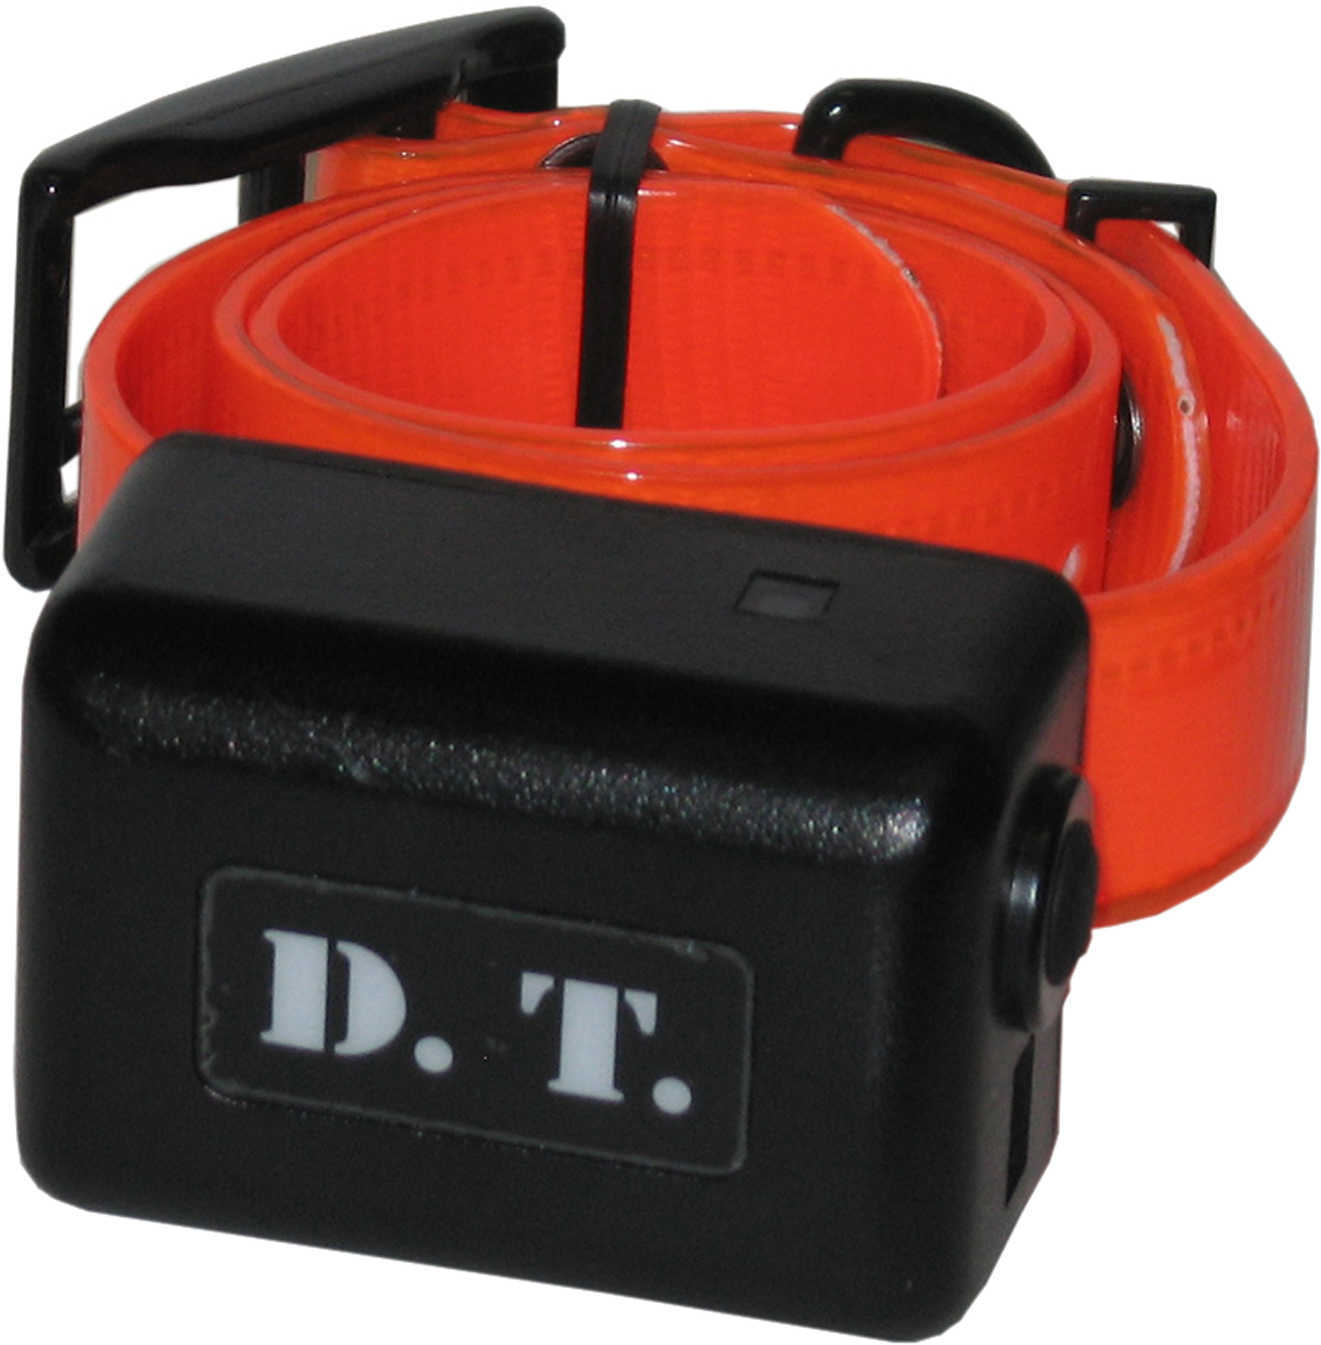 DT Systems H20 1810/1830 Plus Collar Only Orange H2O ADDON-O